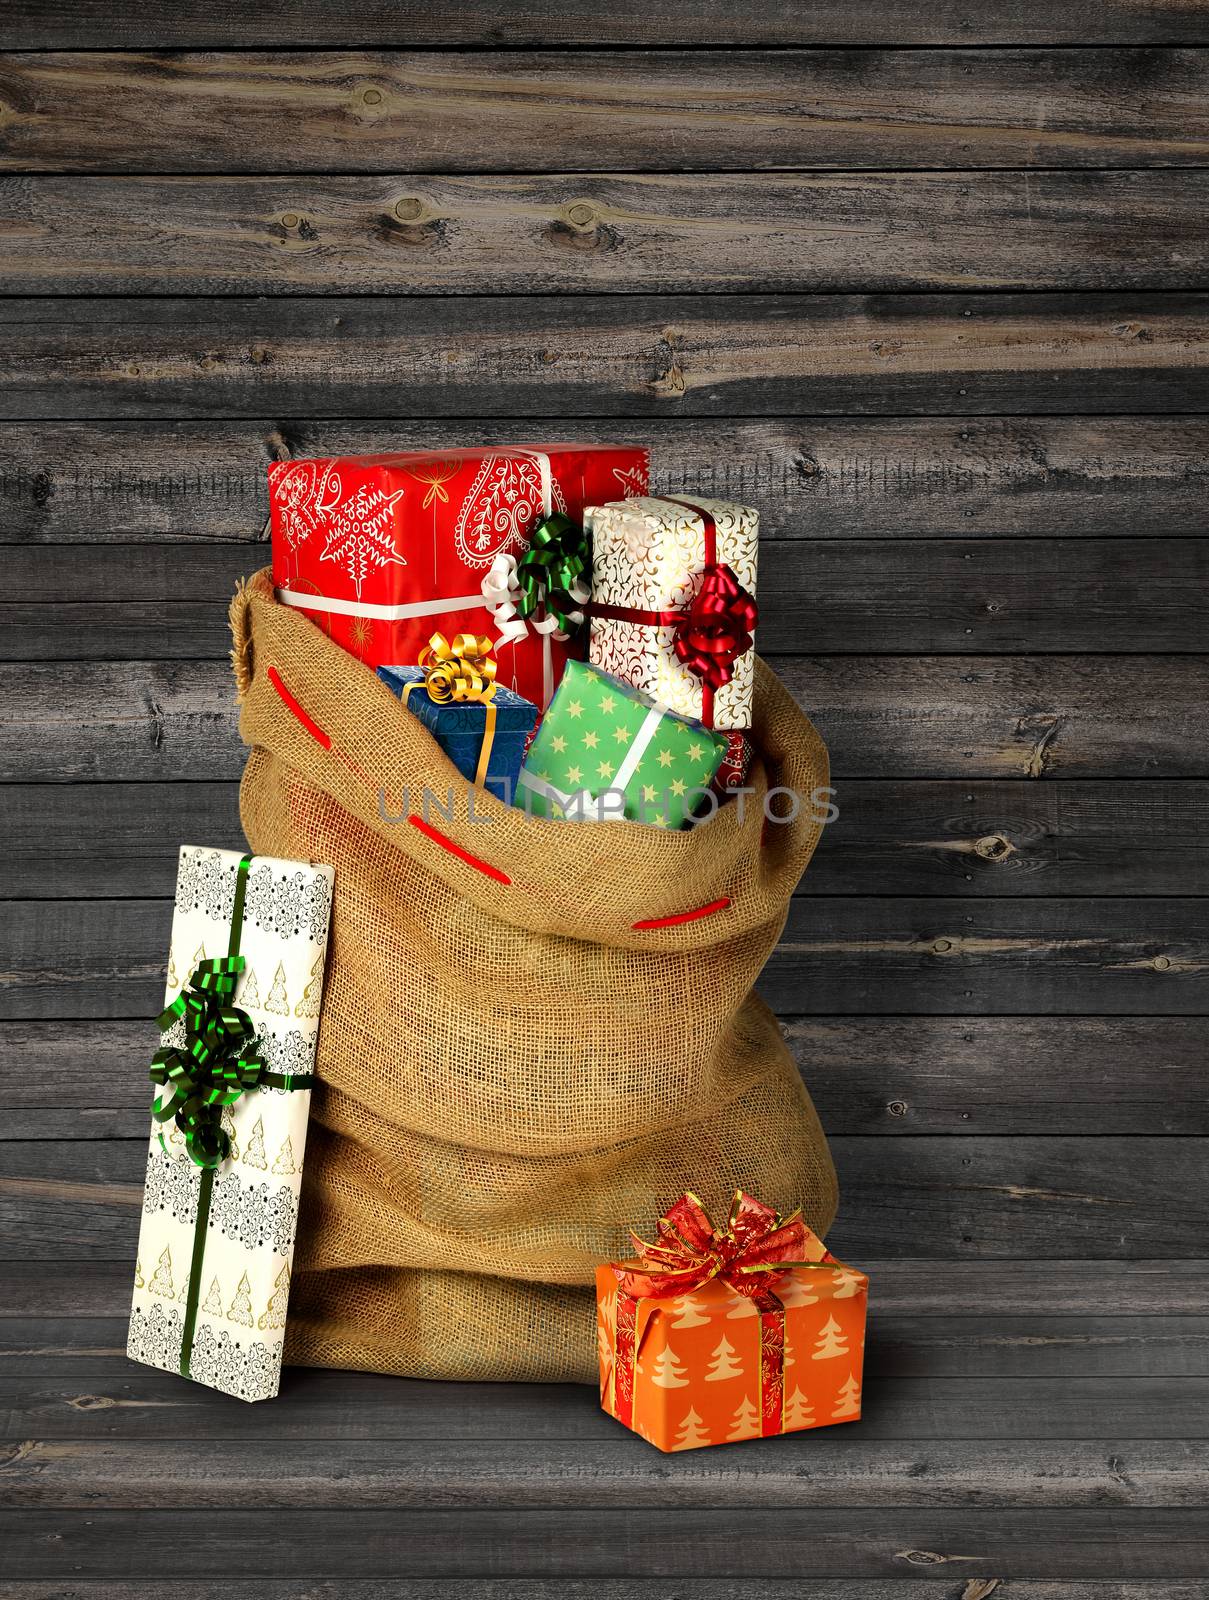 Santas present sack with gift boxes against old grey wooden plank wall